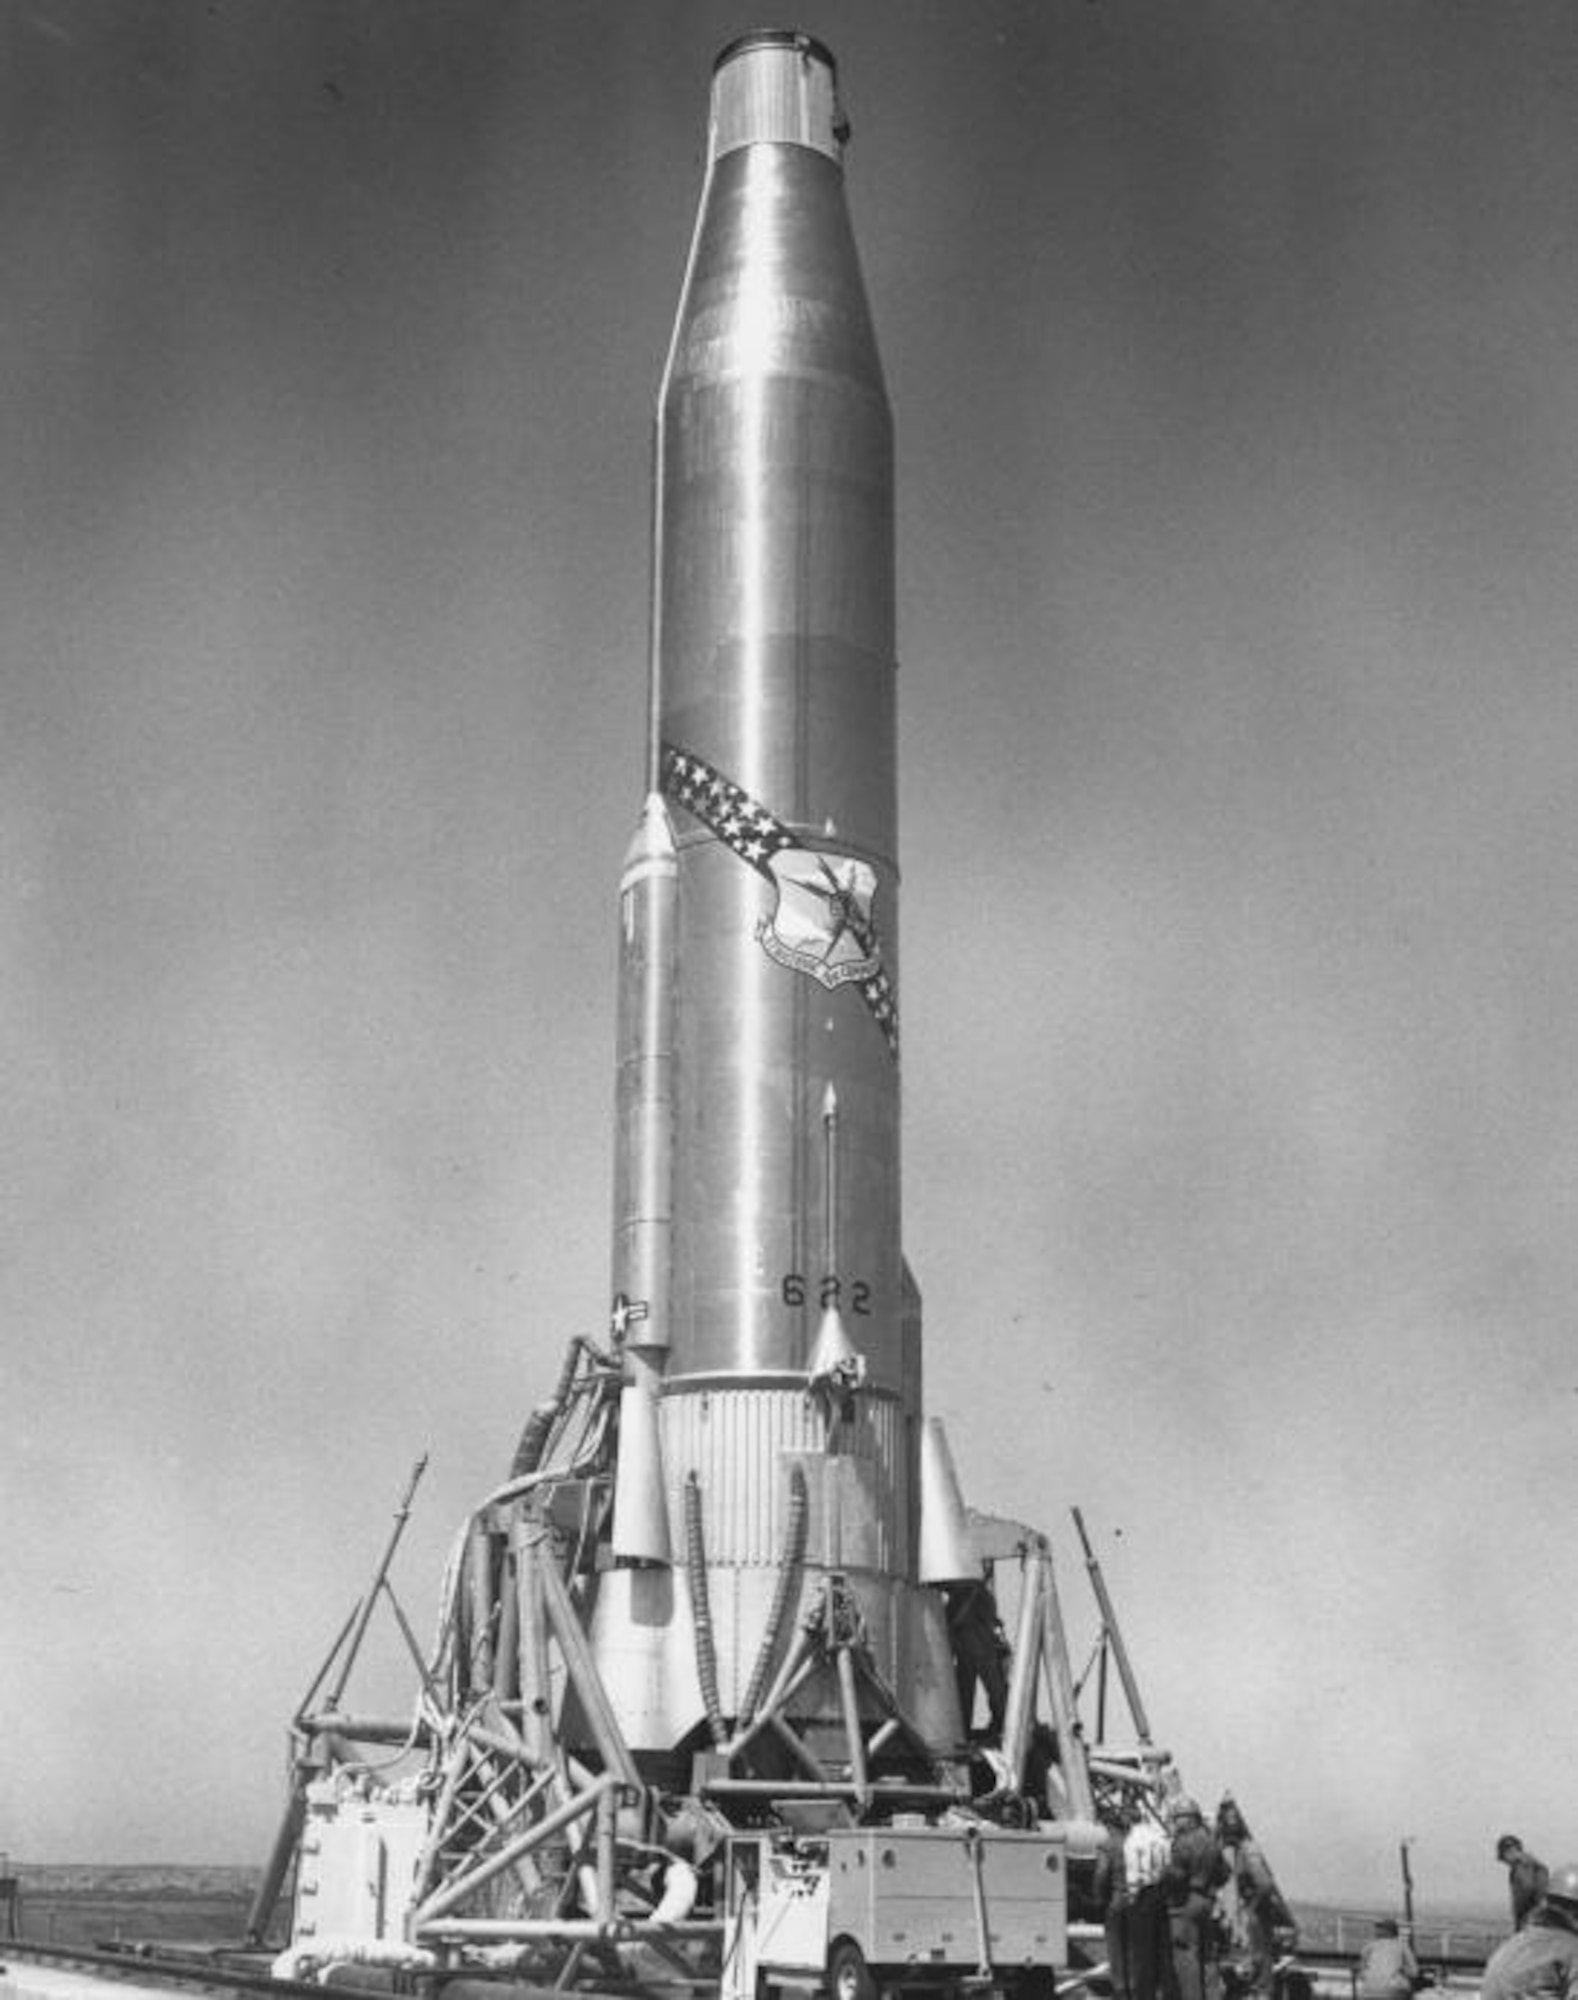 This week in history: March 12, 1965: Last Atlas D ICBM test-fired 